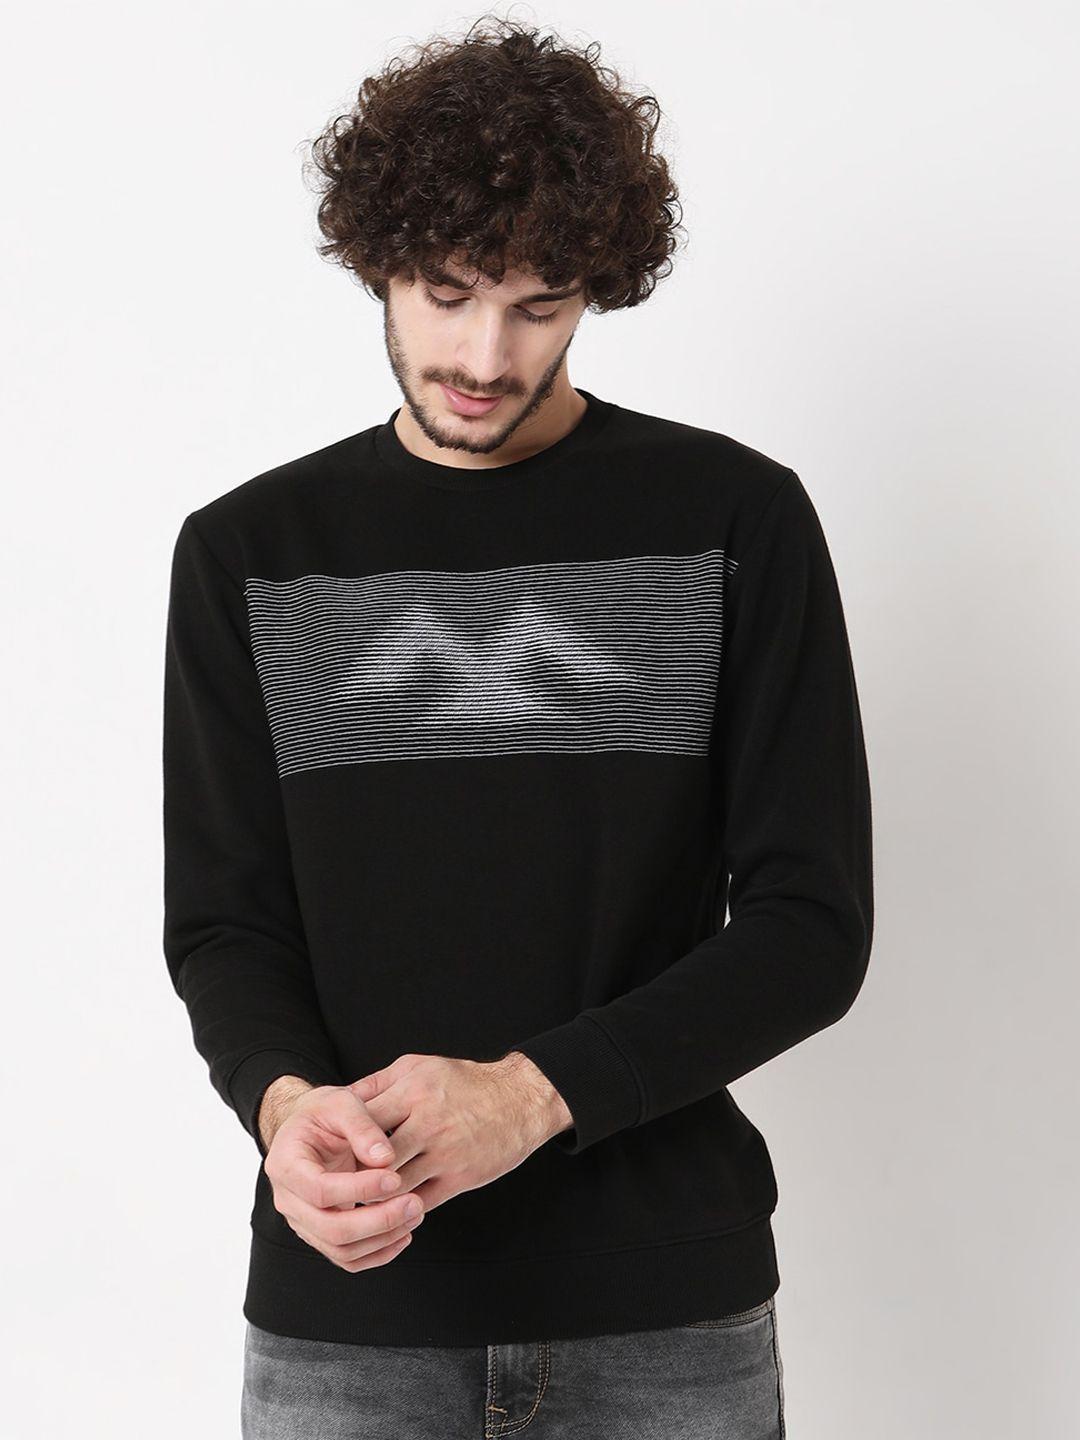 mufti-abstract-printed-cotton-pullover-sweatshirt